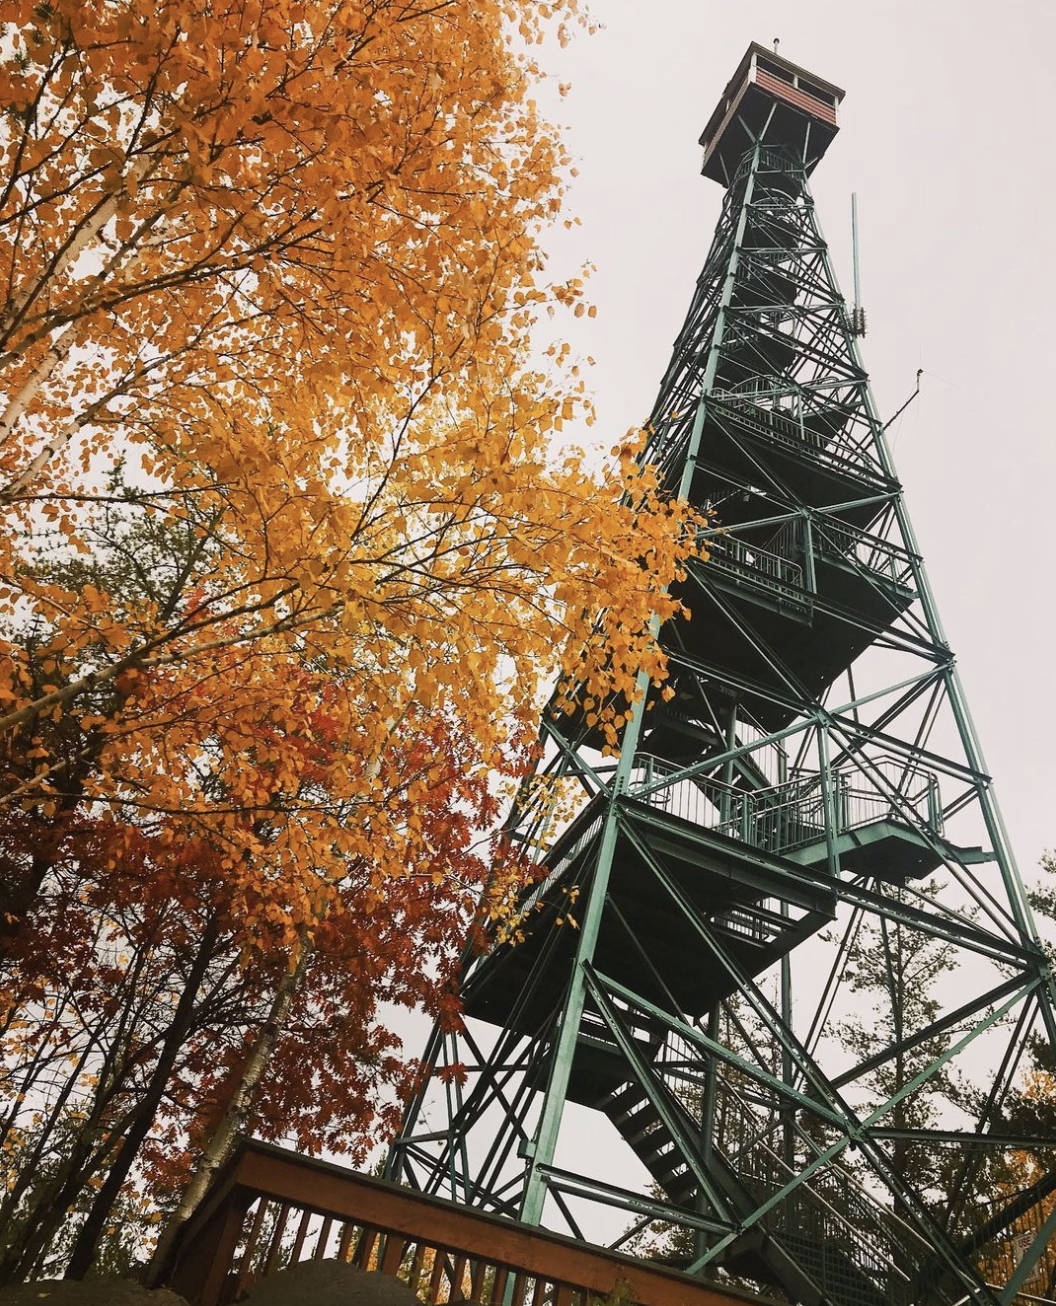 The Temagami Fire Tower; a tall metal lookout tower next to bright orange autumn trees against a cloudy sky.